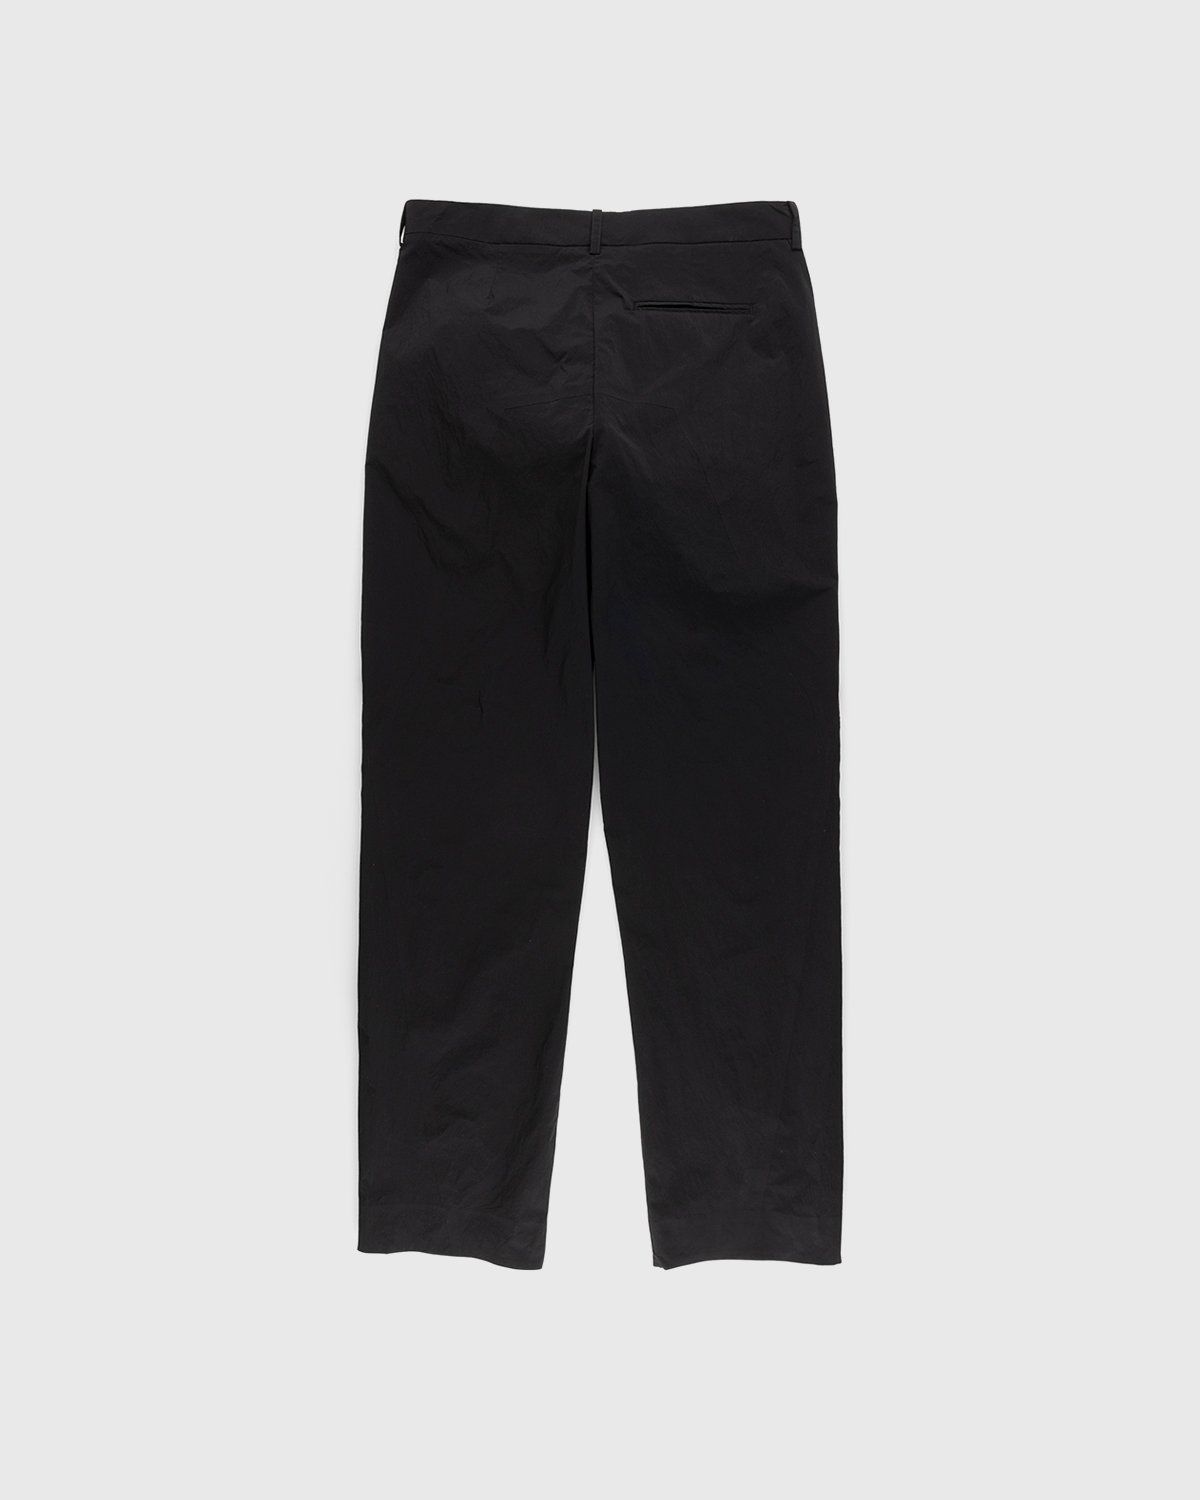 A-Cold-Wall* – Stealth Nylon Pant Black - Trousers - Black - Image 2